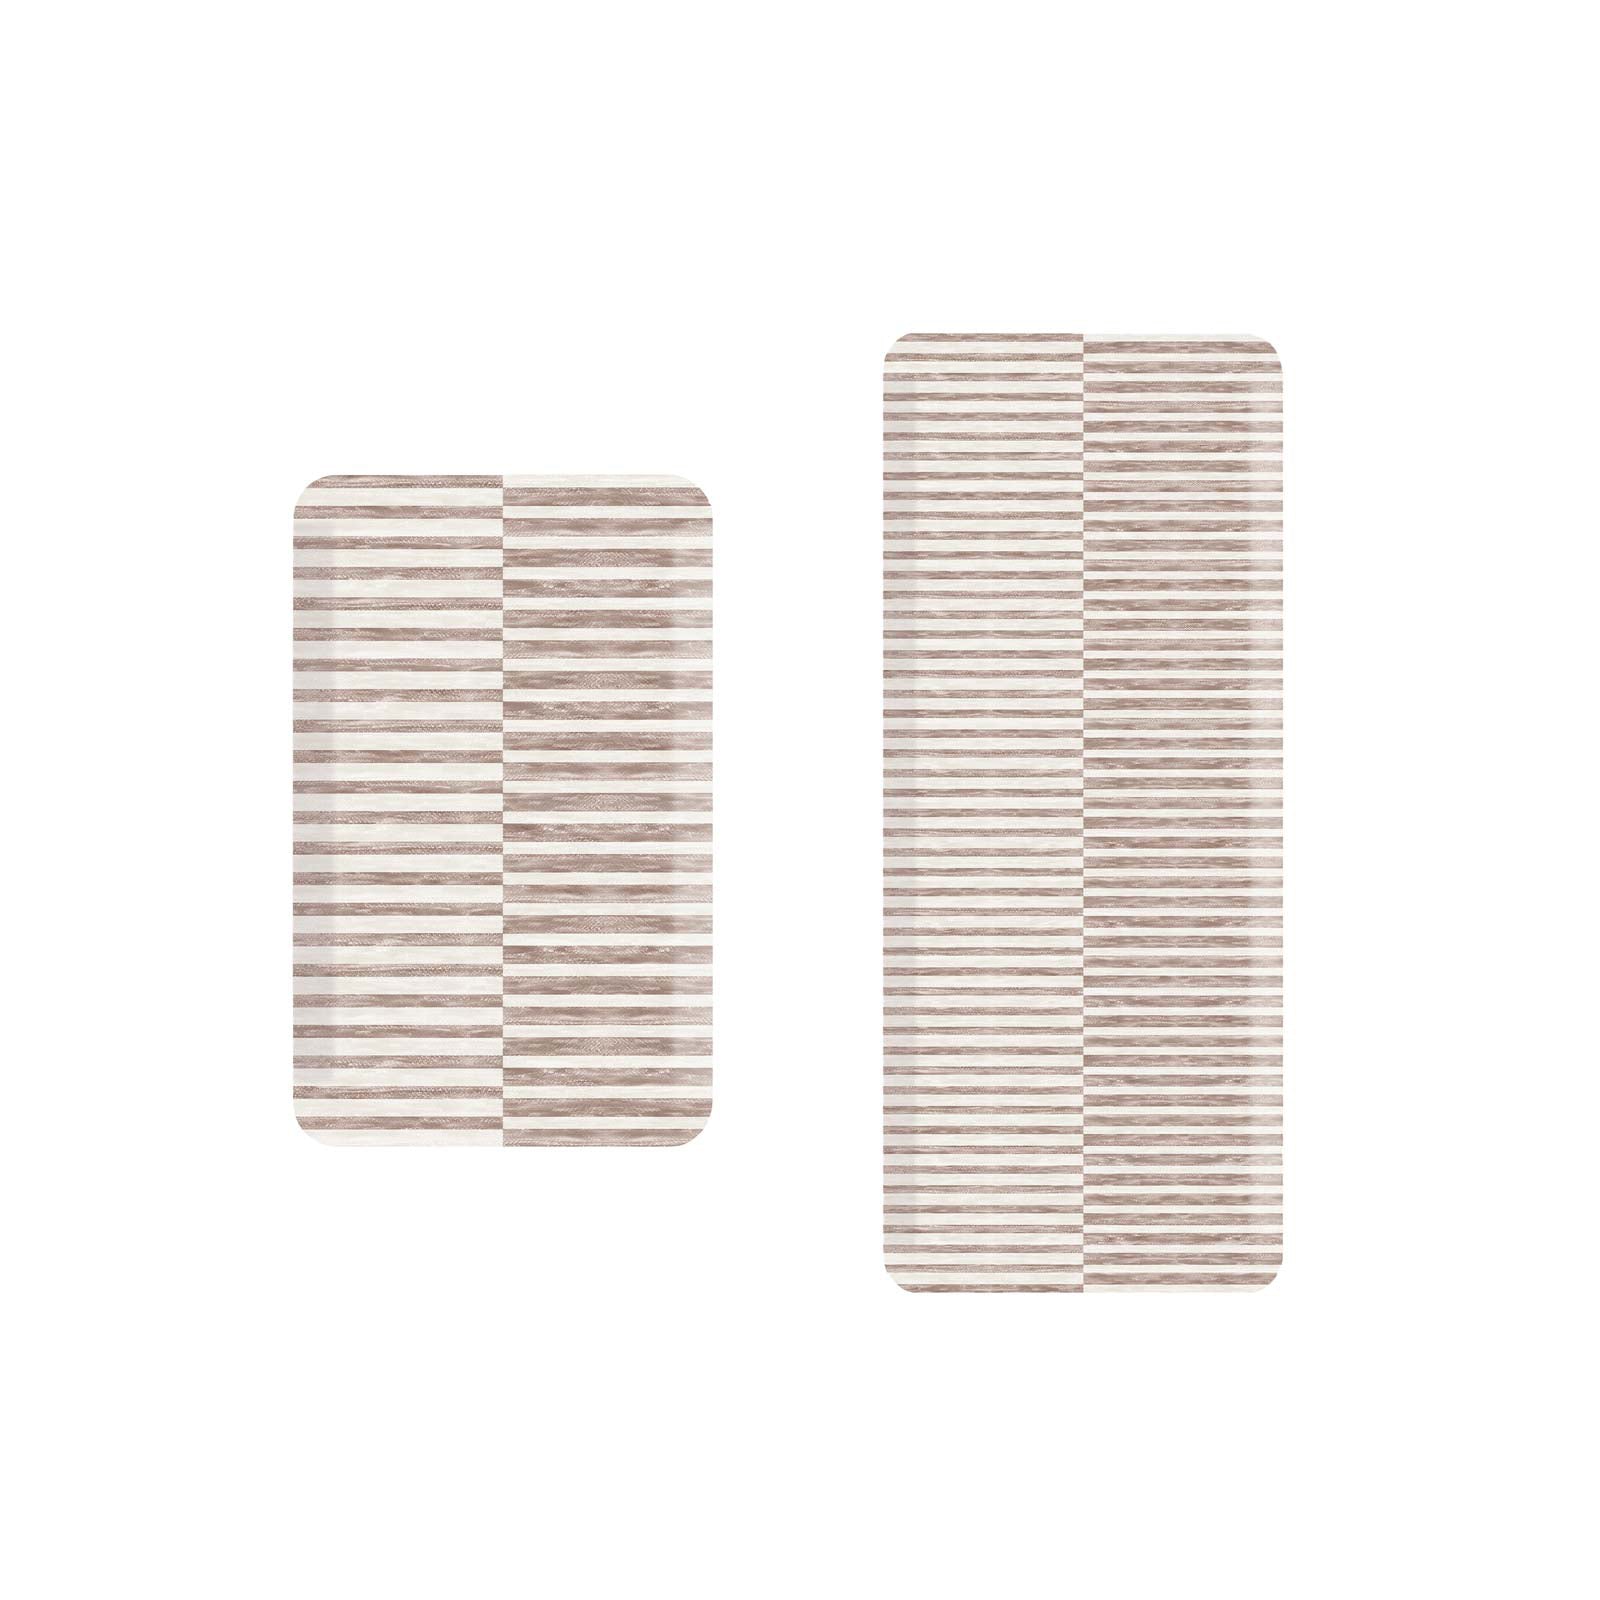 Reese chai beige and white inverted stripe standing mat shown in sizes 22x36 and 22x54